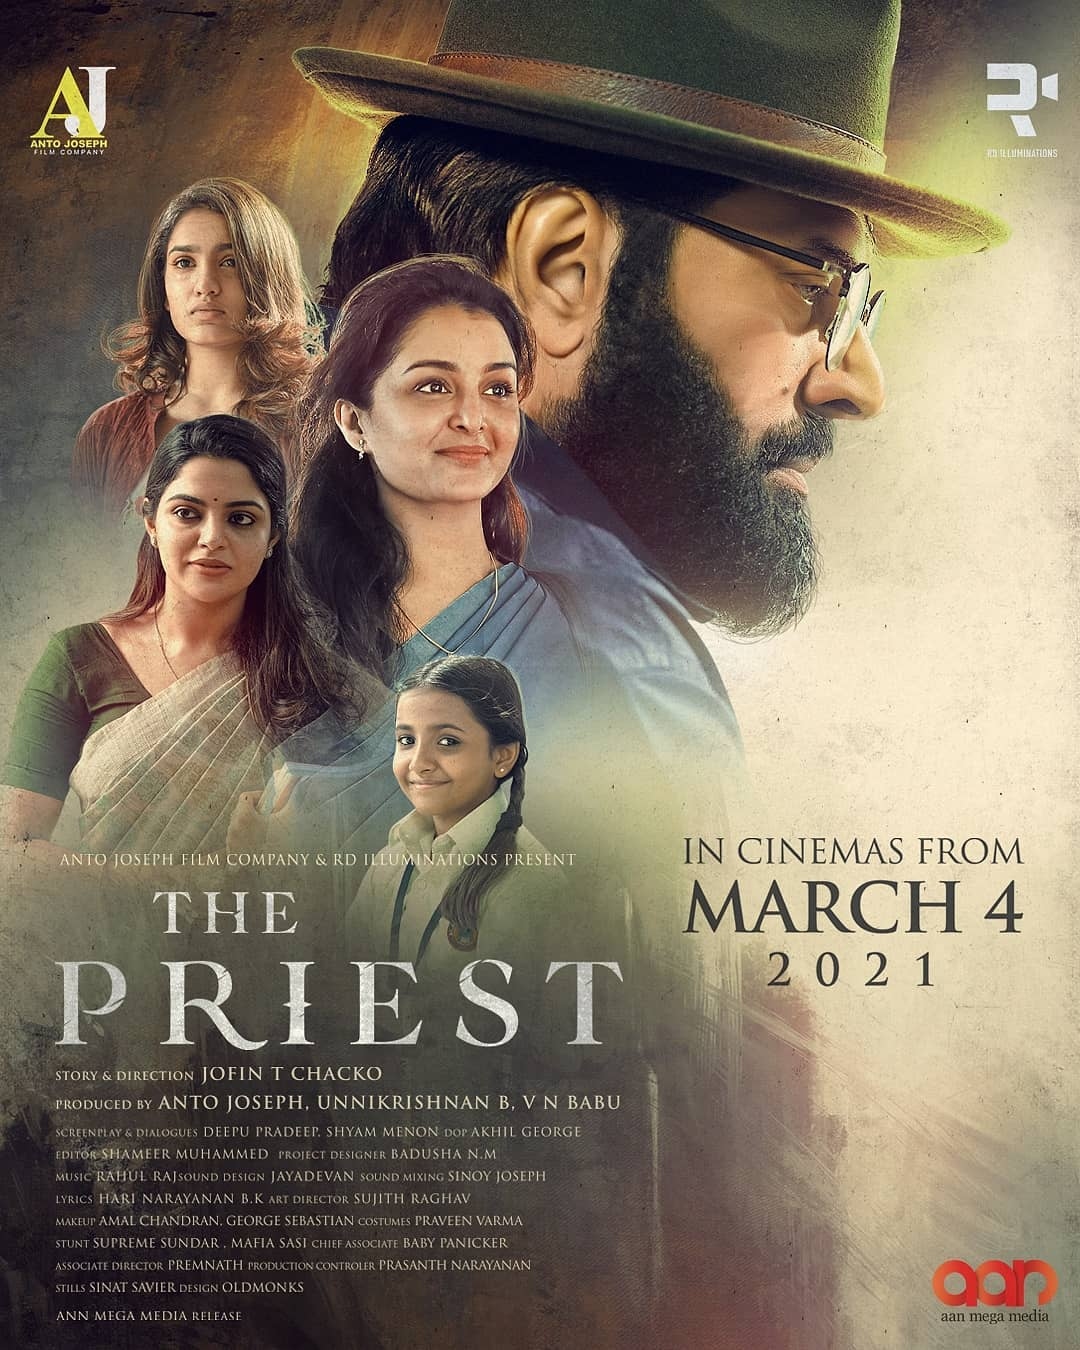 Mammootty's 'The Priest' gets postponed, here's the new release date